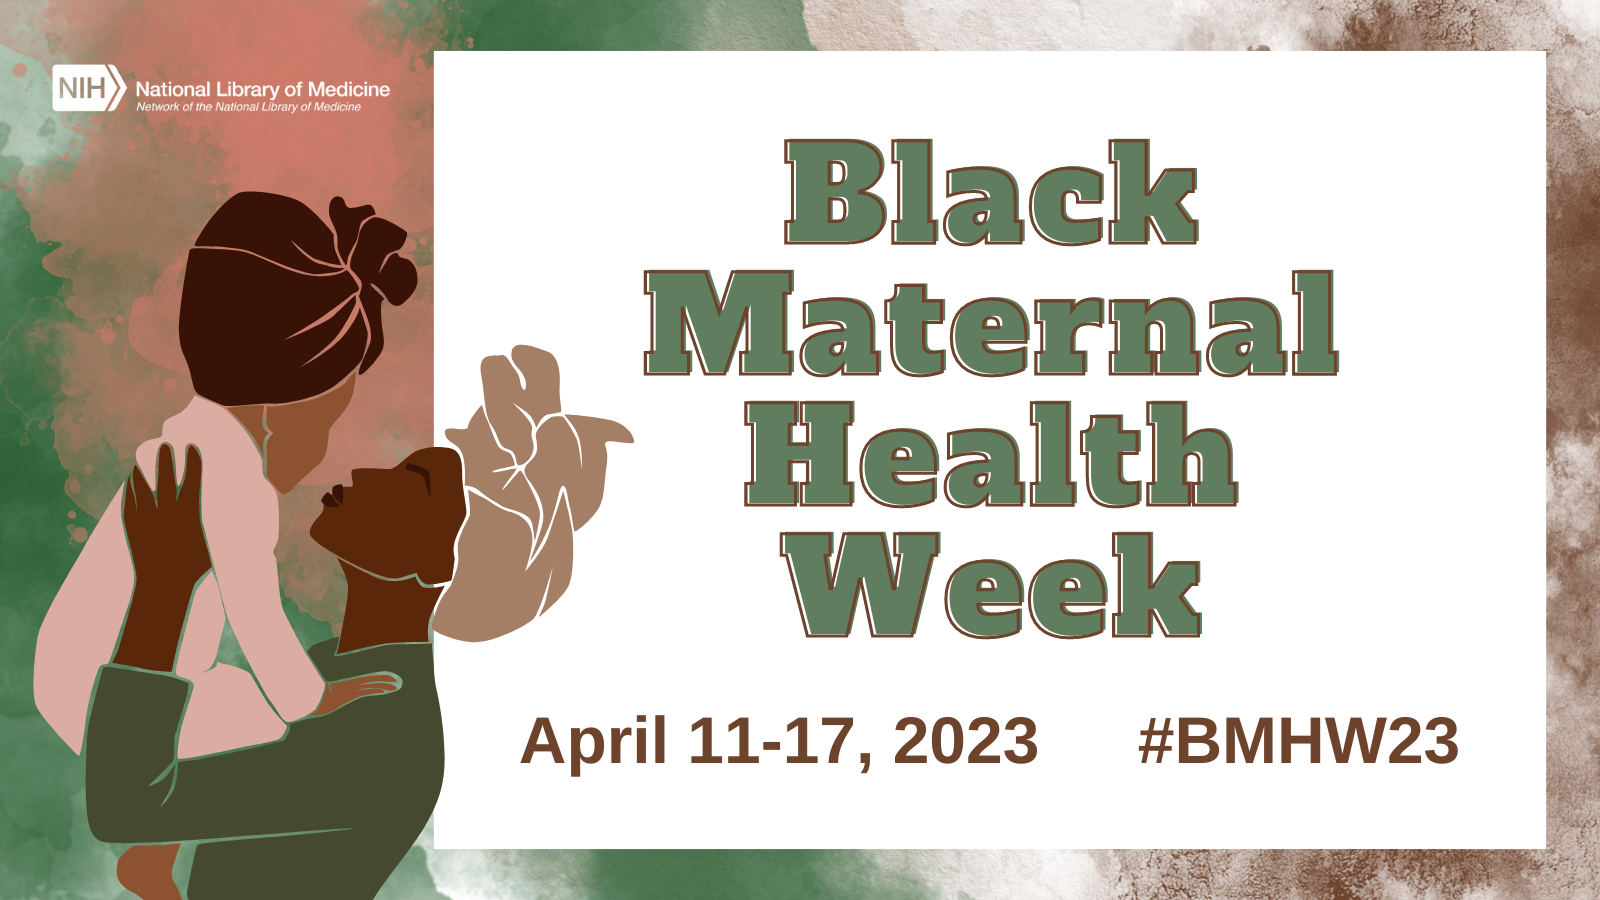 Mother and child with text "Black Maternal Health Week"